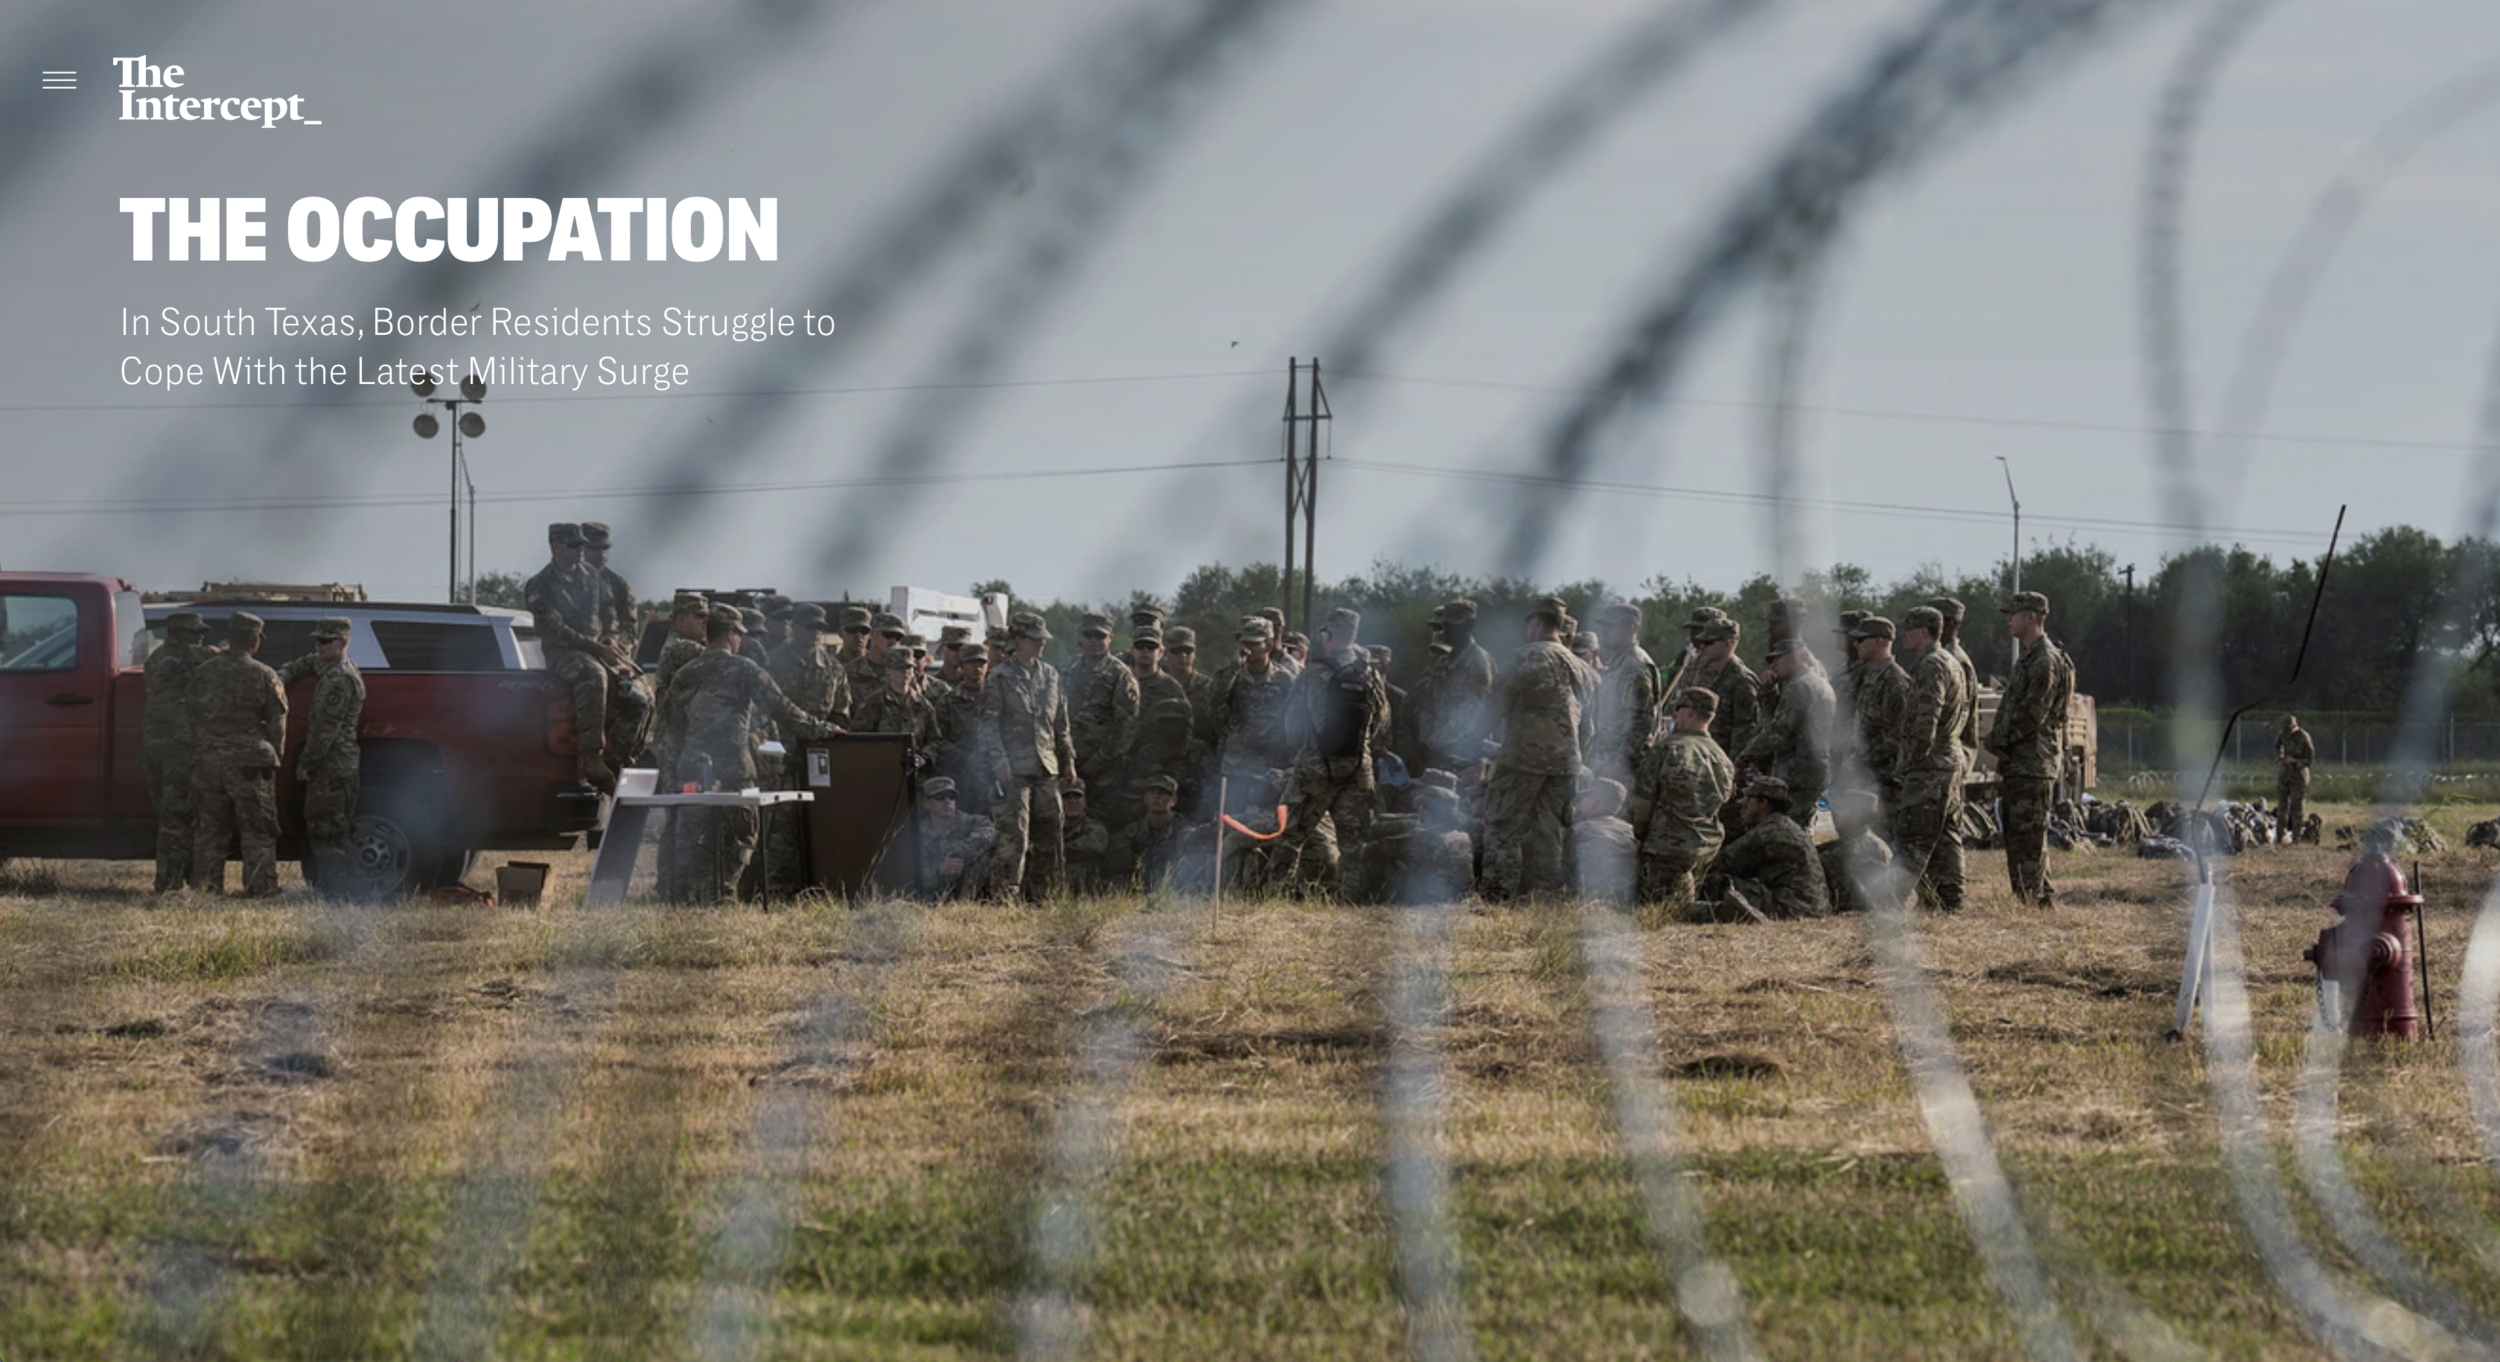  Photography:  Verónica Gabriela Cárdenas   Photo Editing: Ariel Zambelich  Story:   The Occupation:  In South Texas, Border Residents Struggle to Cope With the Latest Military Surge  